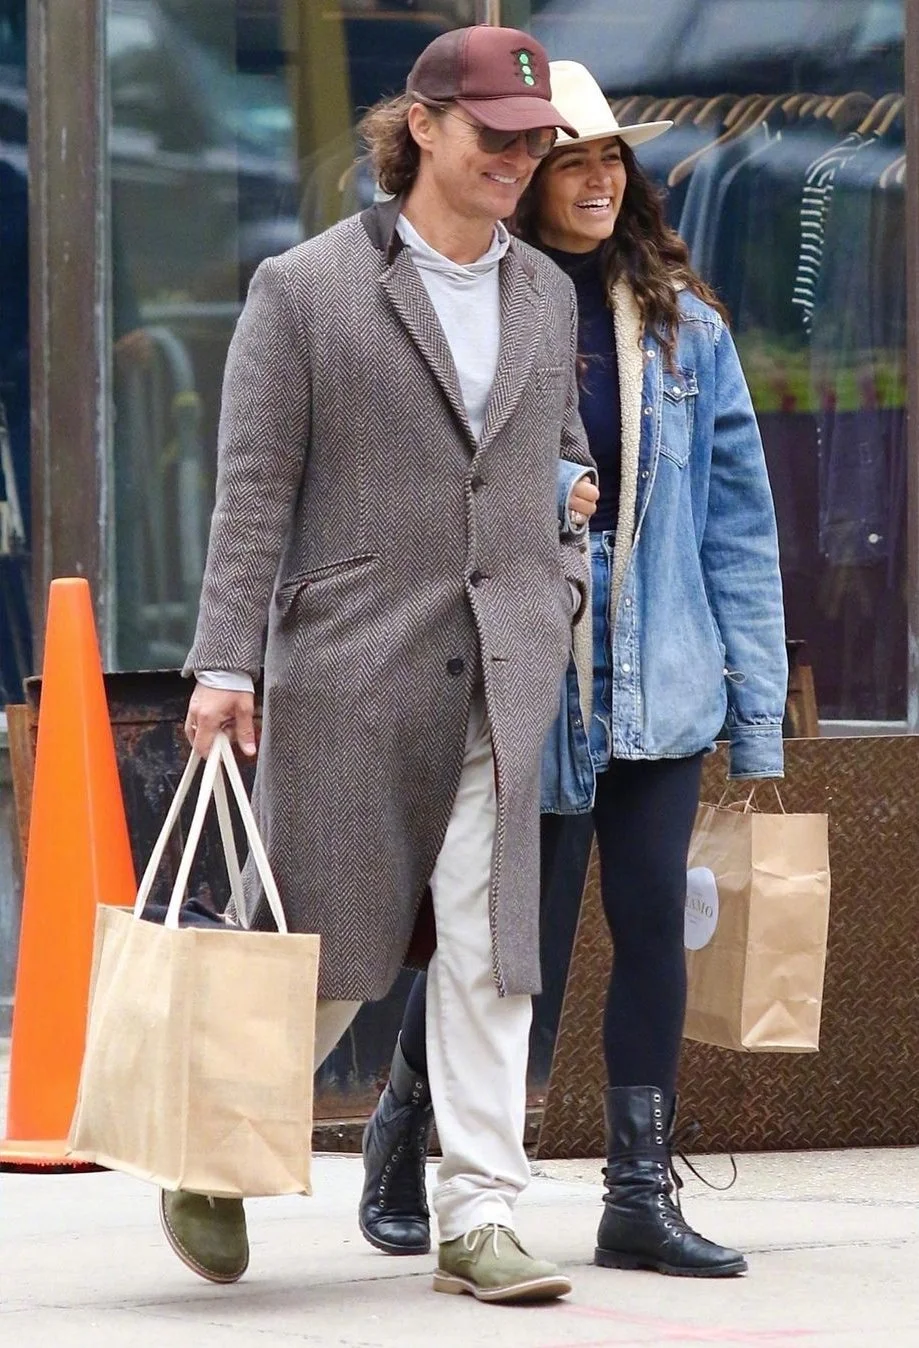 Matthew McConaughey and Camila Alves on the streets of New York